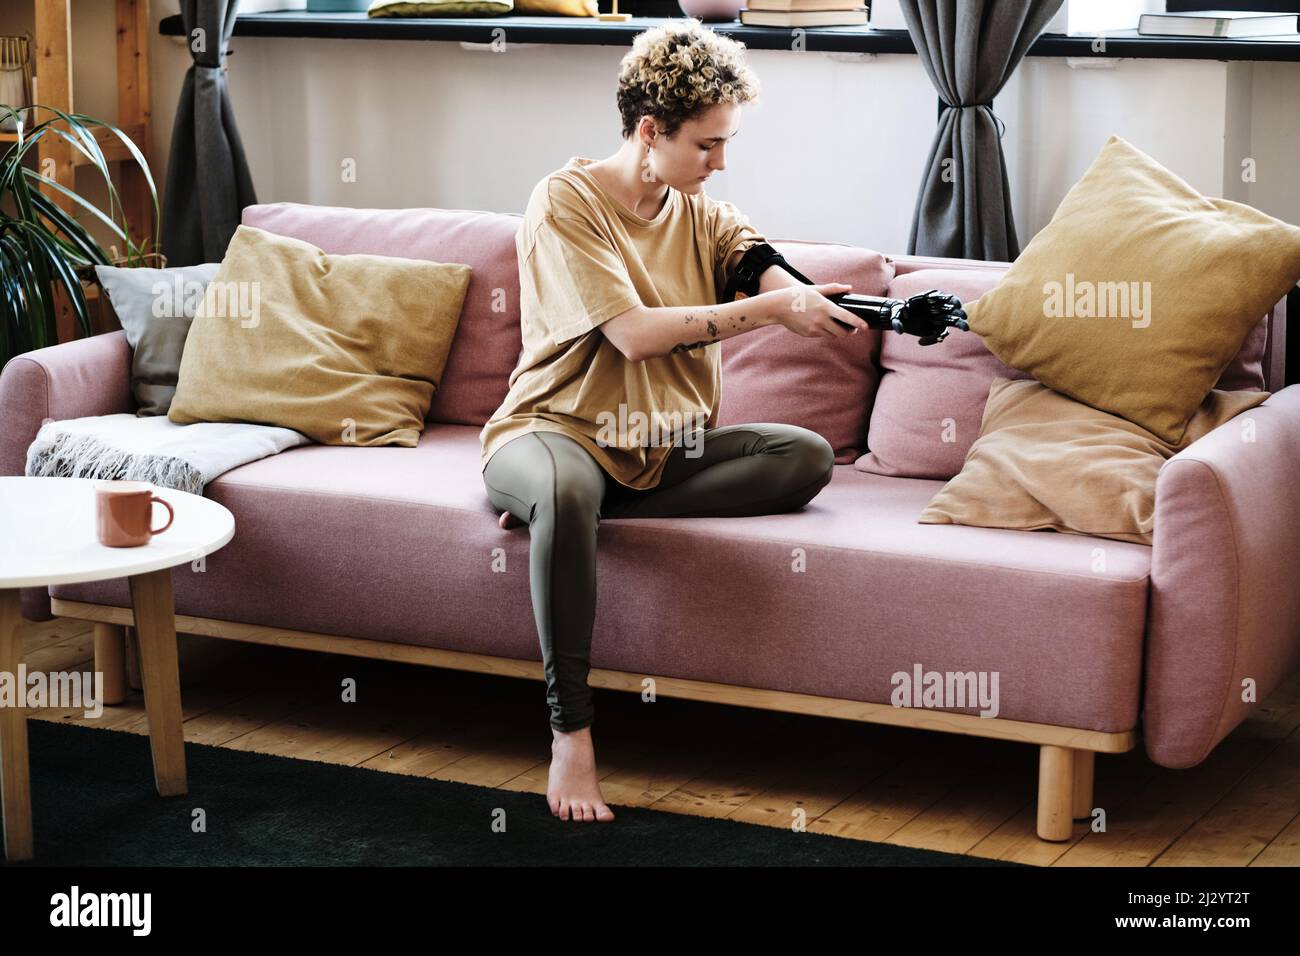 Young woman sitting on sofa in living room and putting on prosthetic arm Stock Photo